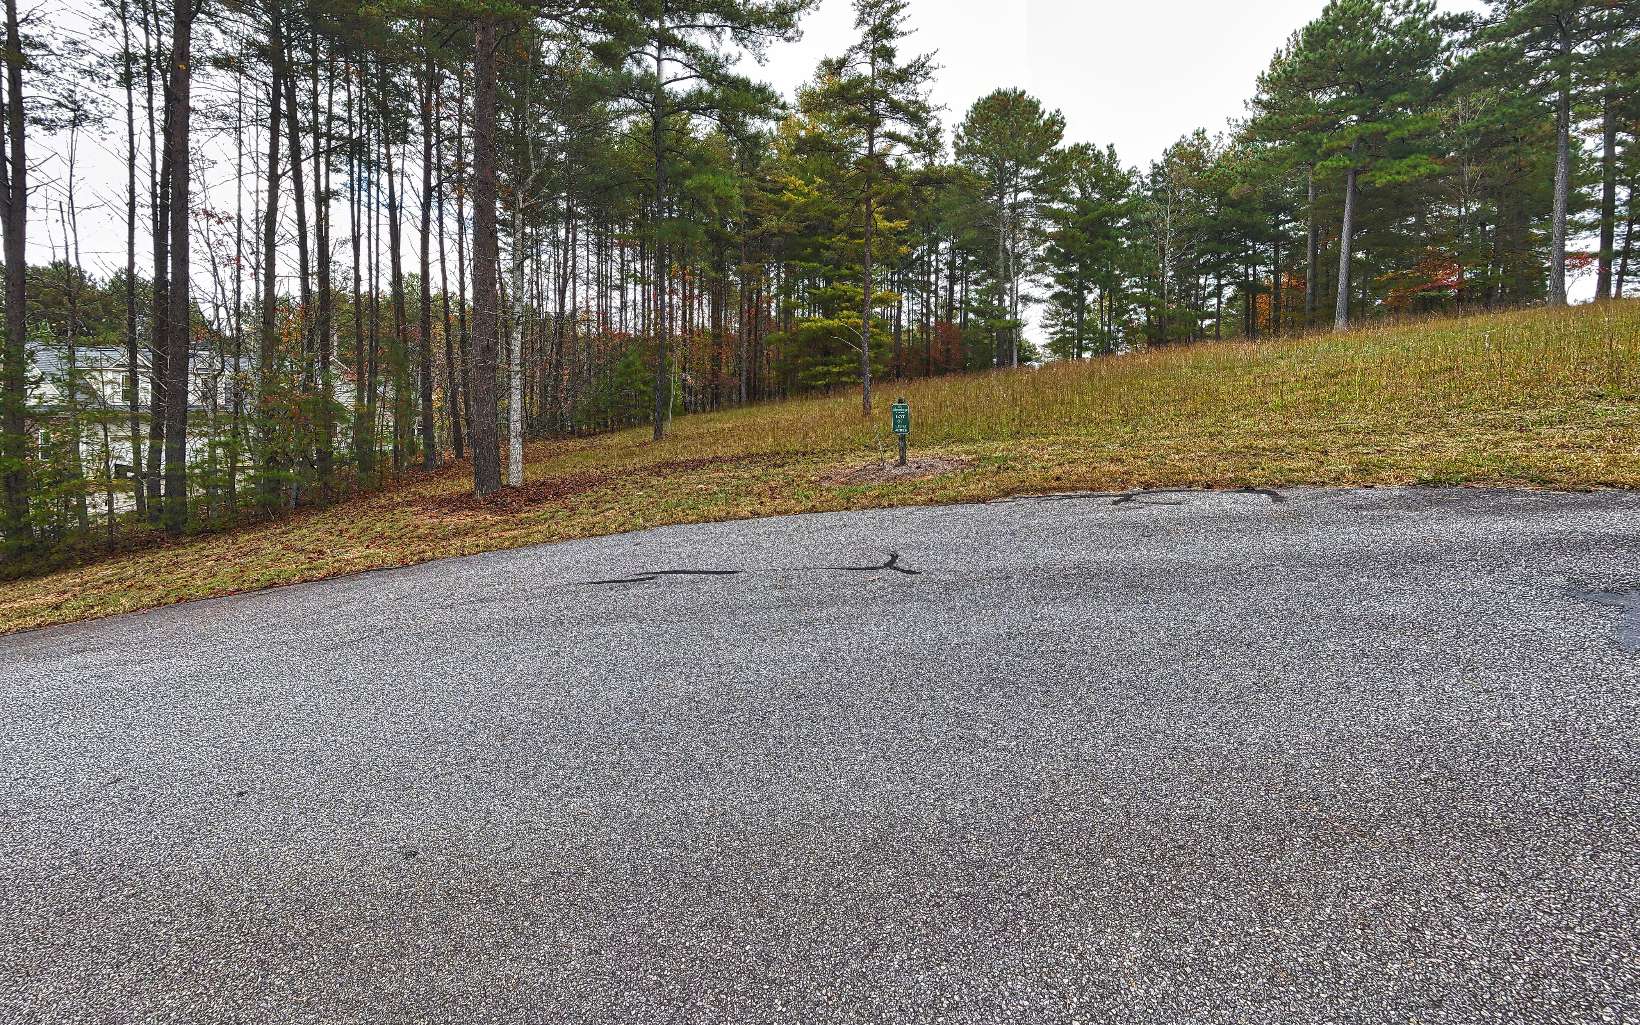 Very gentle 1.17 acre lot located in a gated, established community of upscale homes. Cul-de-sac lot for privacy as well! Underground utilities, excellent location close to Blairsville, Ga & Murphy, NC. All paved access, county water, electric available, gated entrance and a public boat ramp at the end of Deaver Rd! Golf, fishing, boating, shopping and fine dining are just moments away. Less than 30 minutes to new Cherokee Casino. Priced to Move!